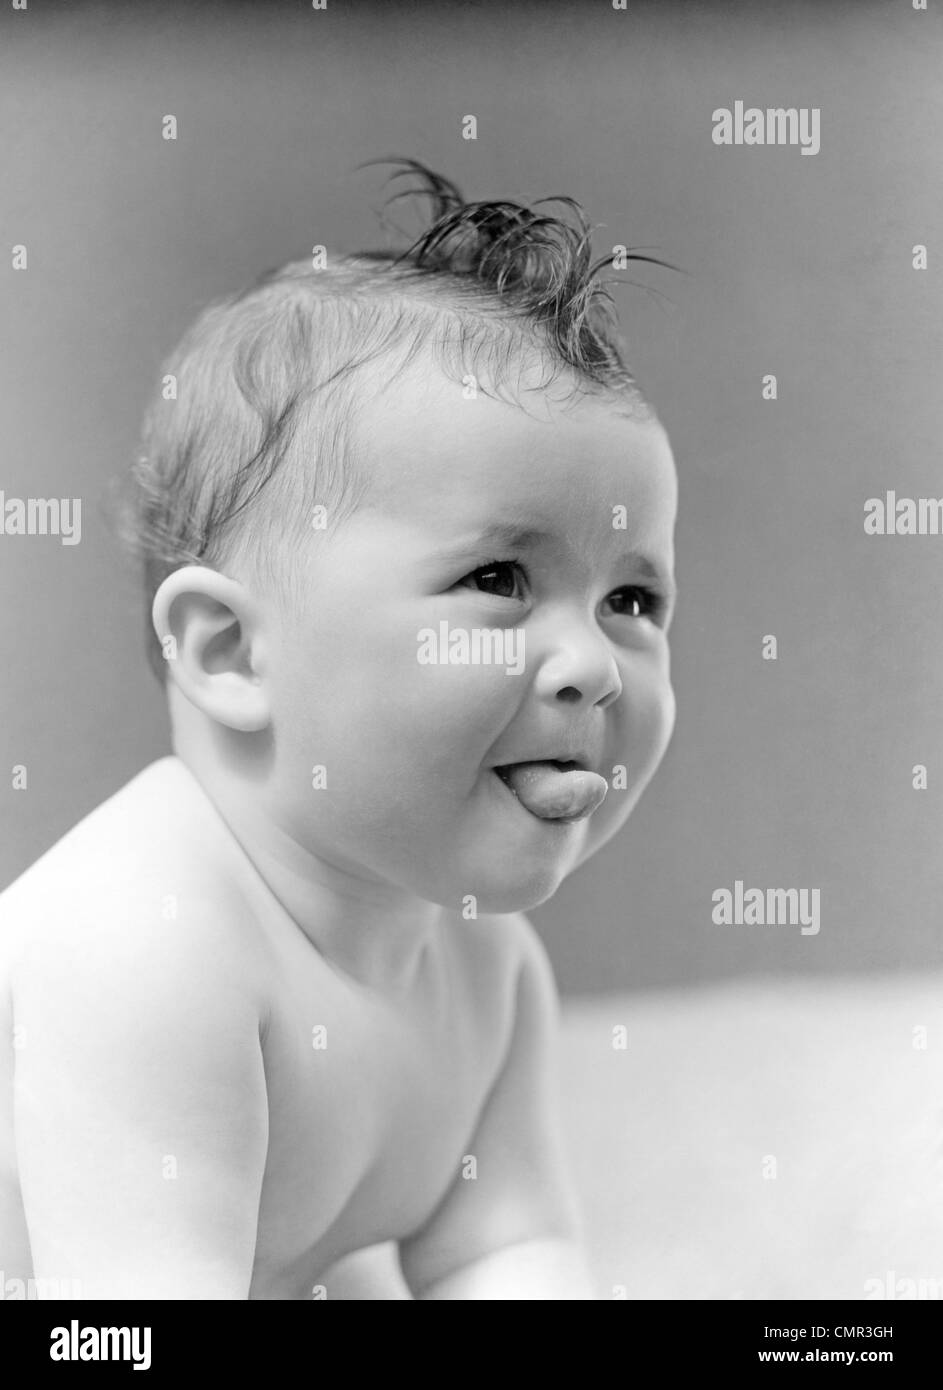 1940 CUTE BABY STICKING OUT TONGUE STUDIO Banque D'Images